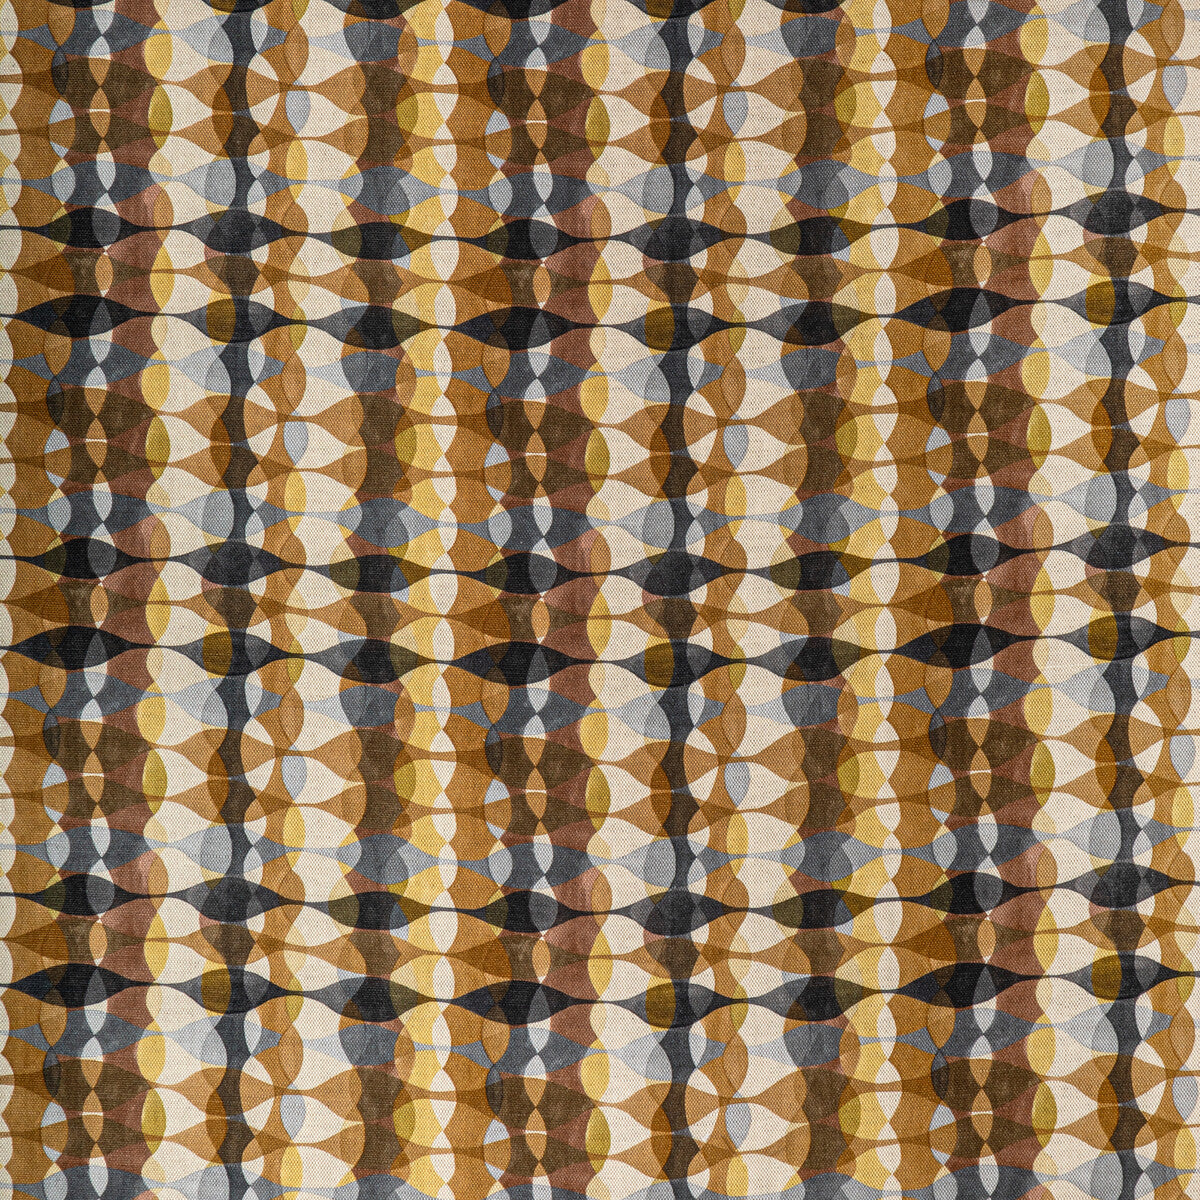 Overtone Print fabric in coin color - pattern GWF-3775.64.0 - by Lee Jofa Modern in the Rhapsody collection